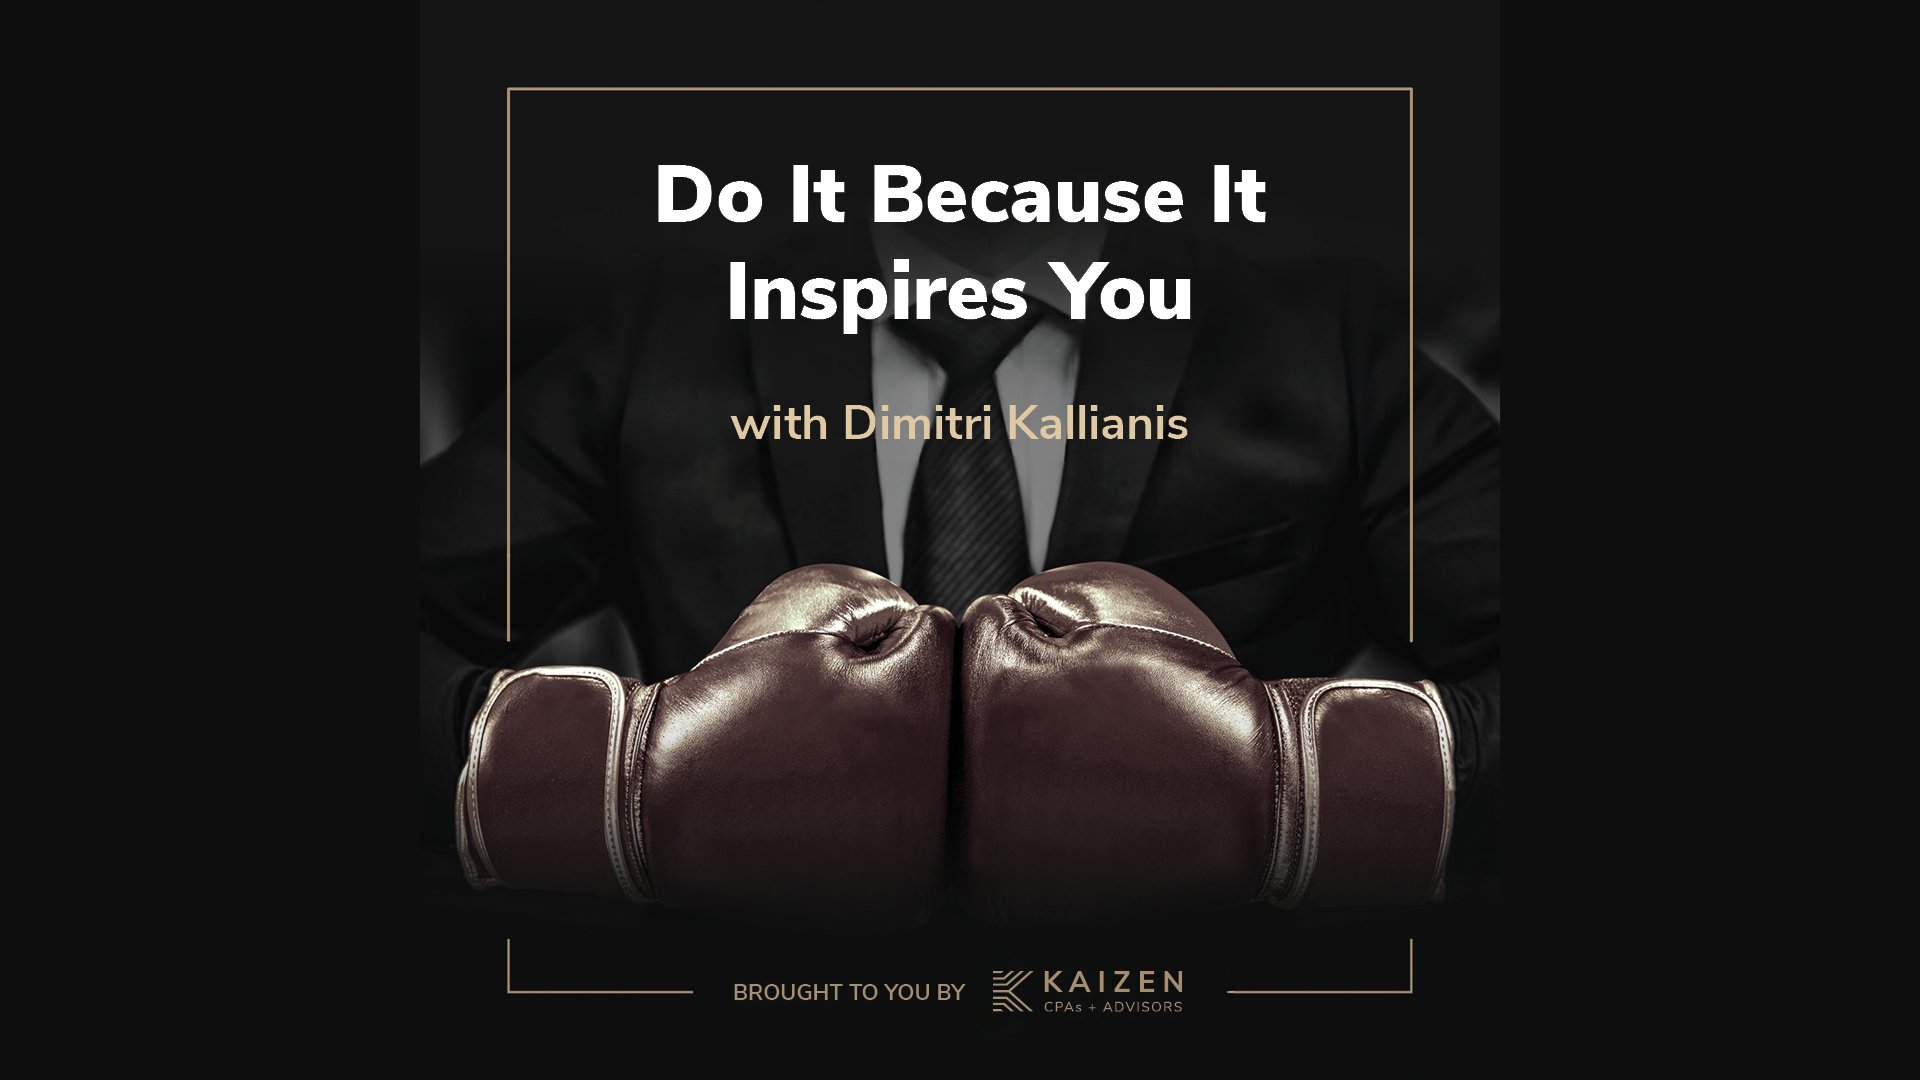 Blood, Sweat & Business Podcast: Do It Because It Inspires You